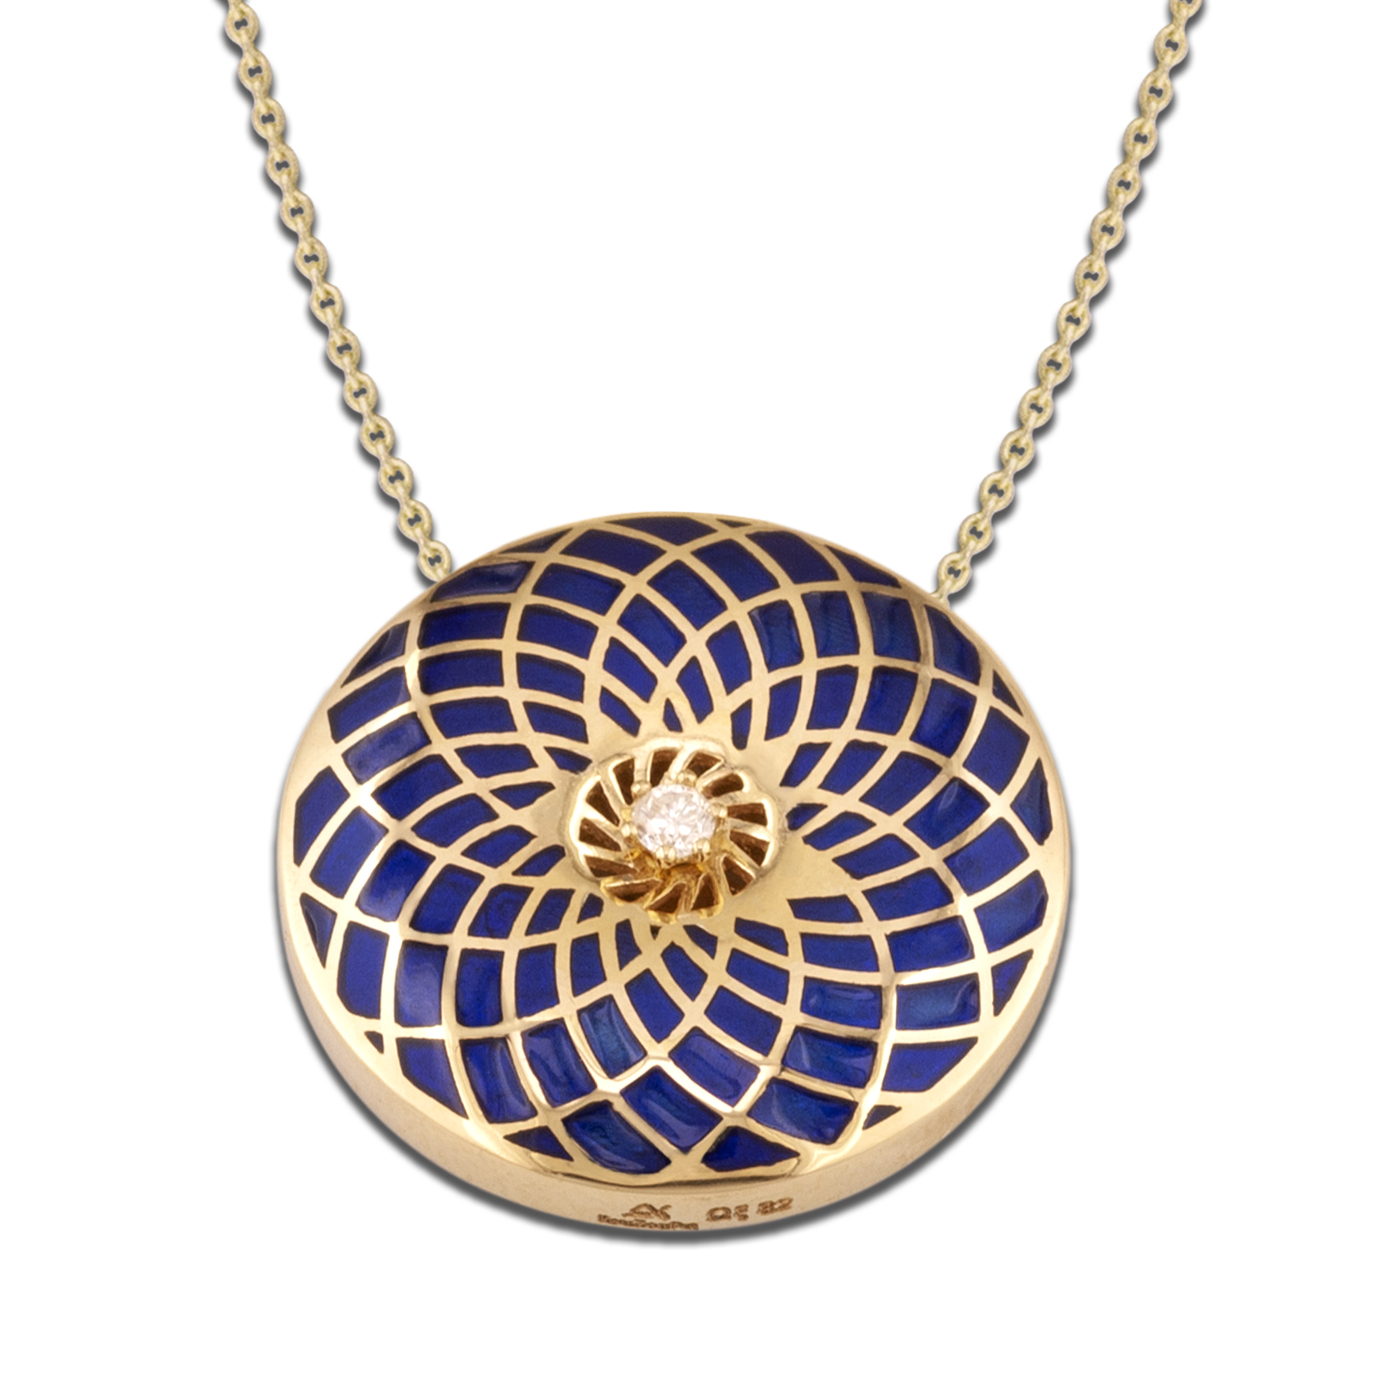 gold flower pendant with diamonds and enamel